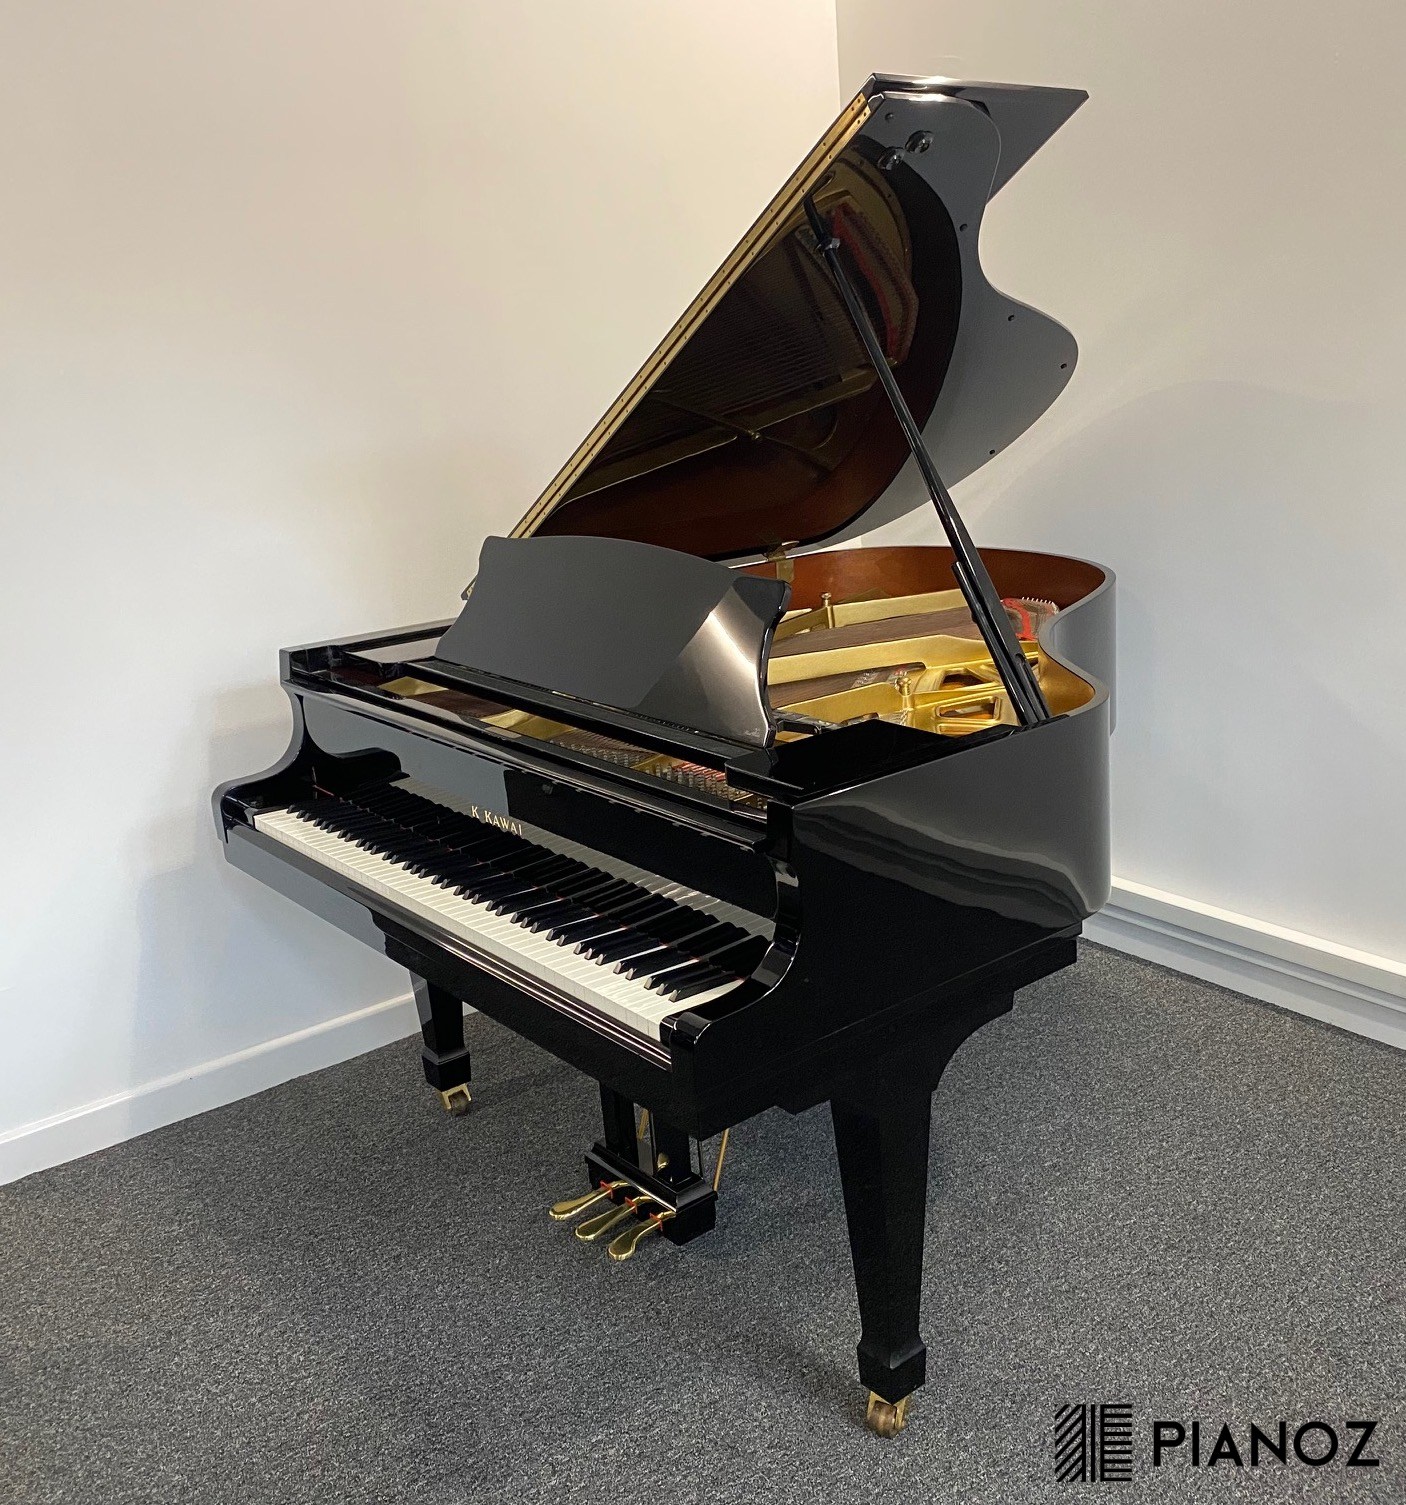 Bocadillo Altoparlante Zapatos Kawai RX-2 Japanese Grand Piano for sale UK | P I A N O Z - The Ultimate  Online Piano Showroom - UK Piano Shop - Black Baby Grands